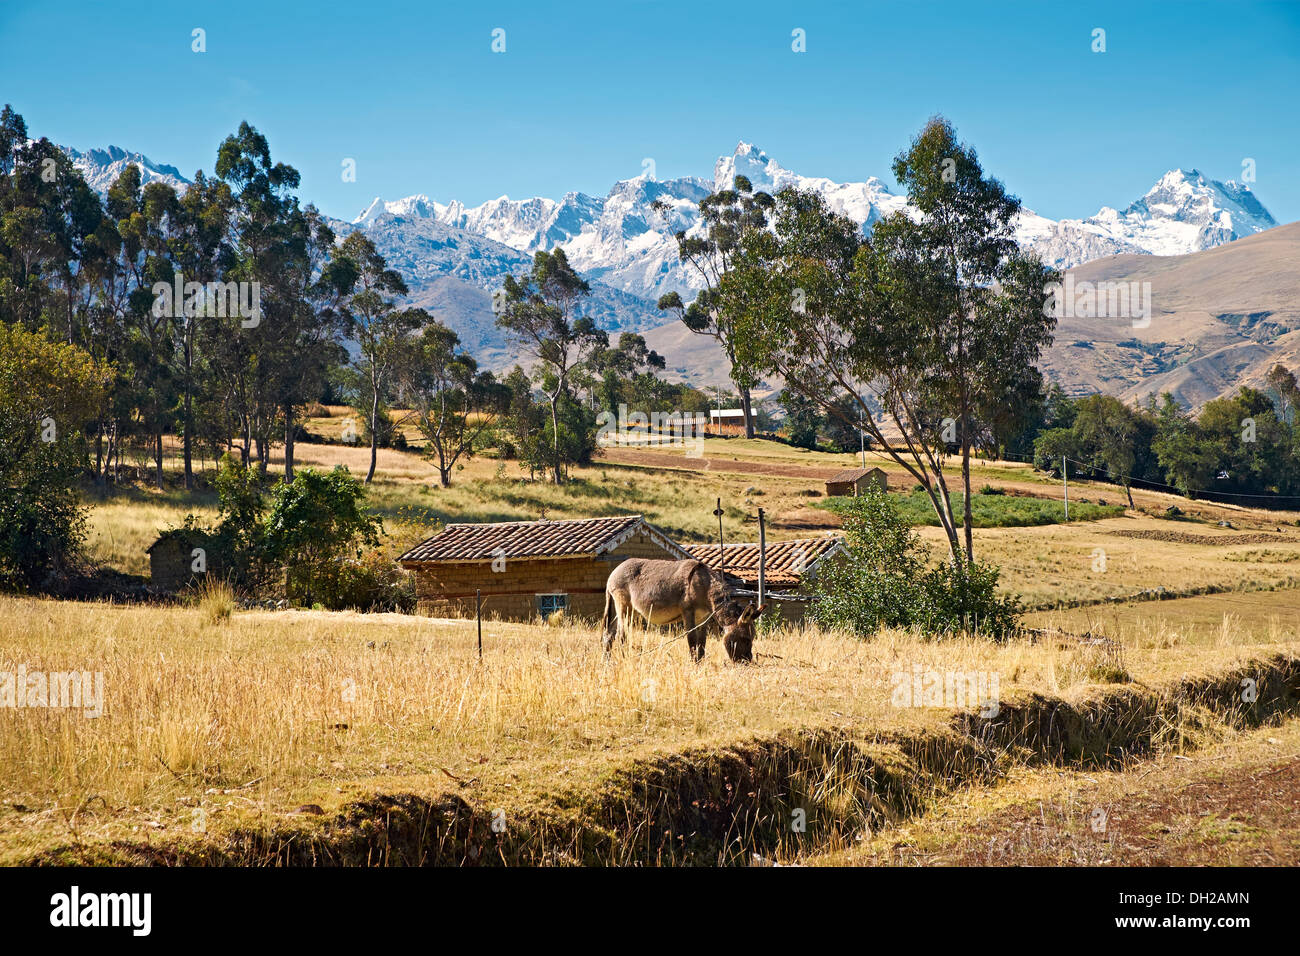 A donkey at a rural settlement with the summit of Huantsan in the Peruvian Andes. Stock Photo